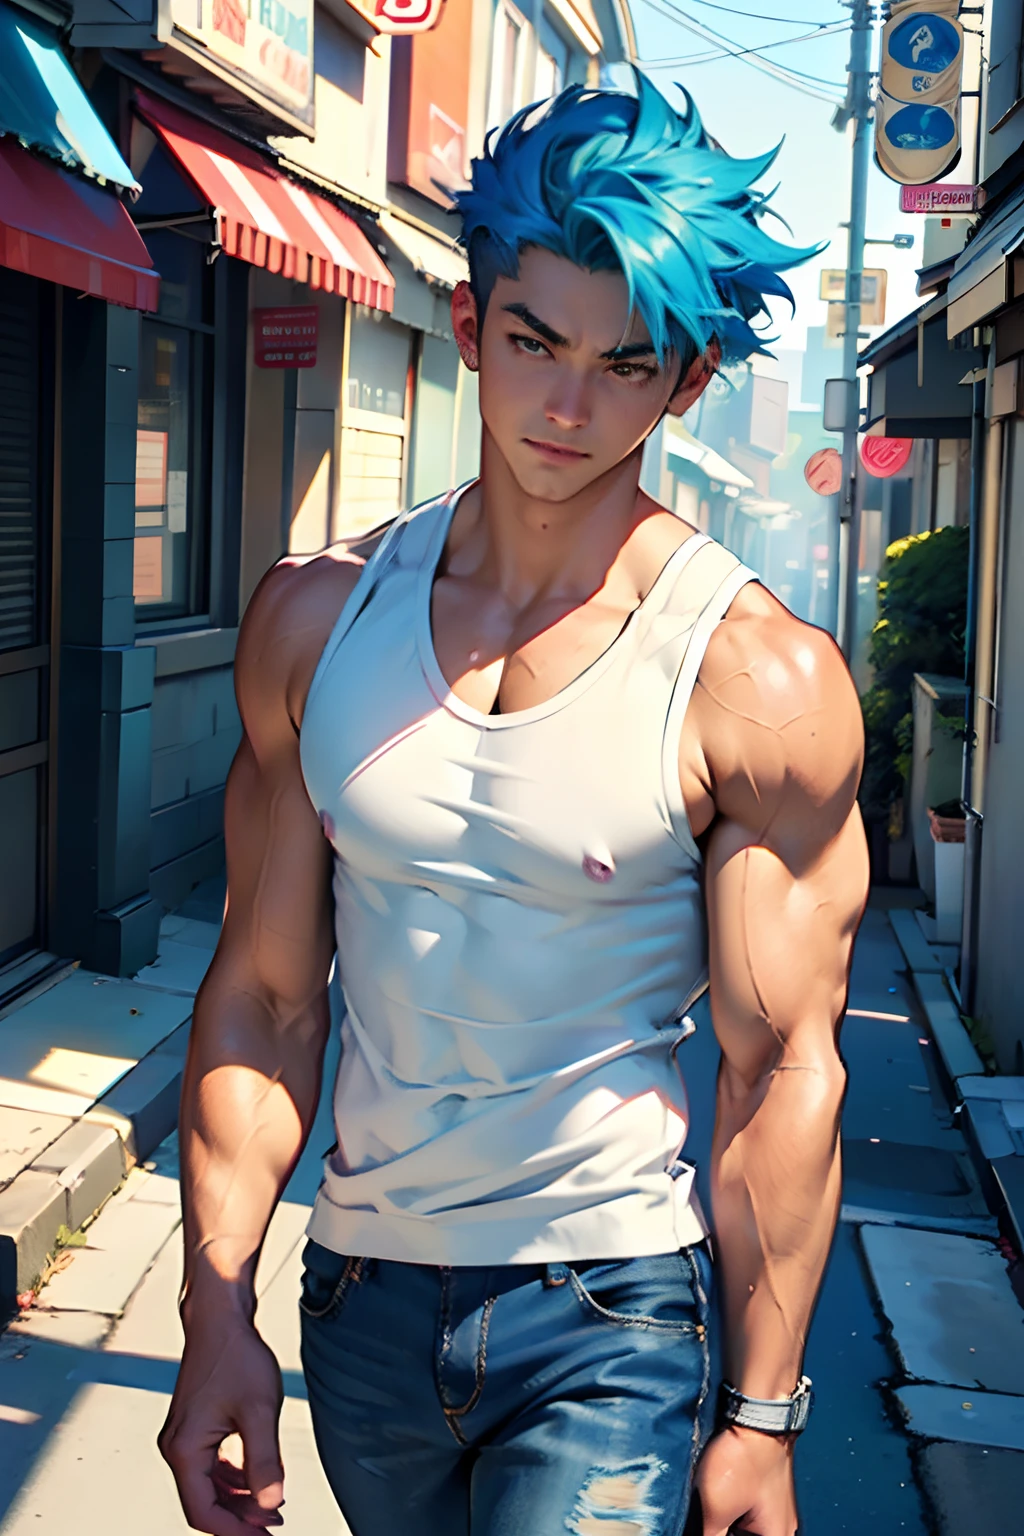 Anime style art)), Extremely muscular masculine character